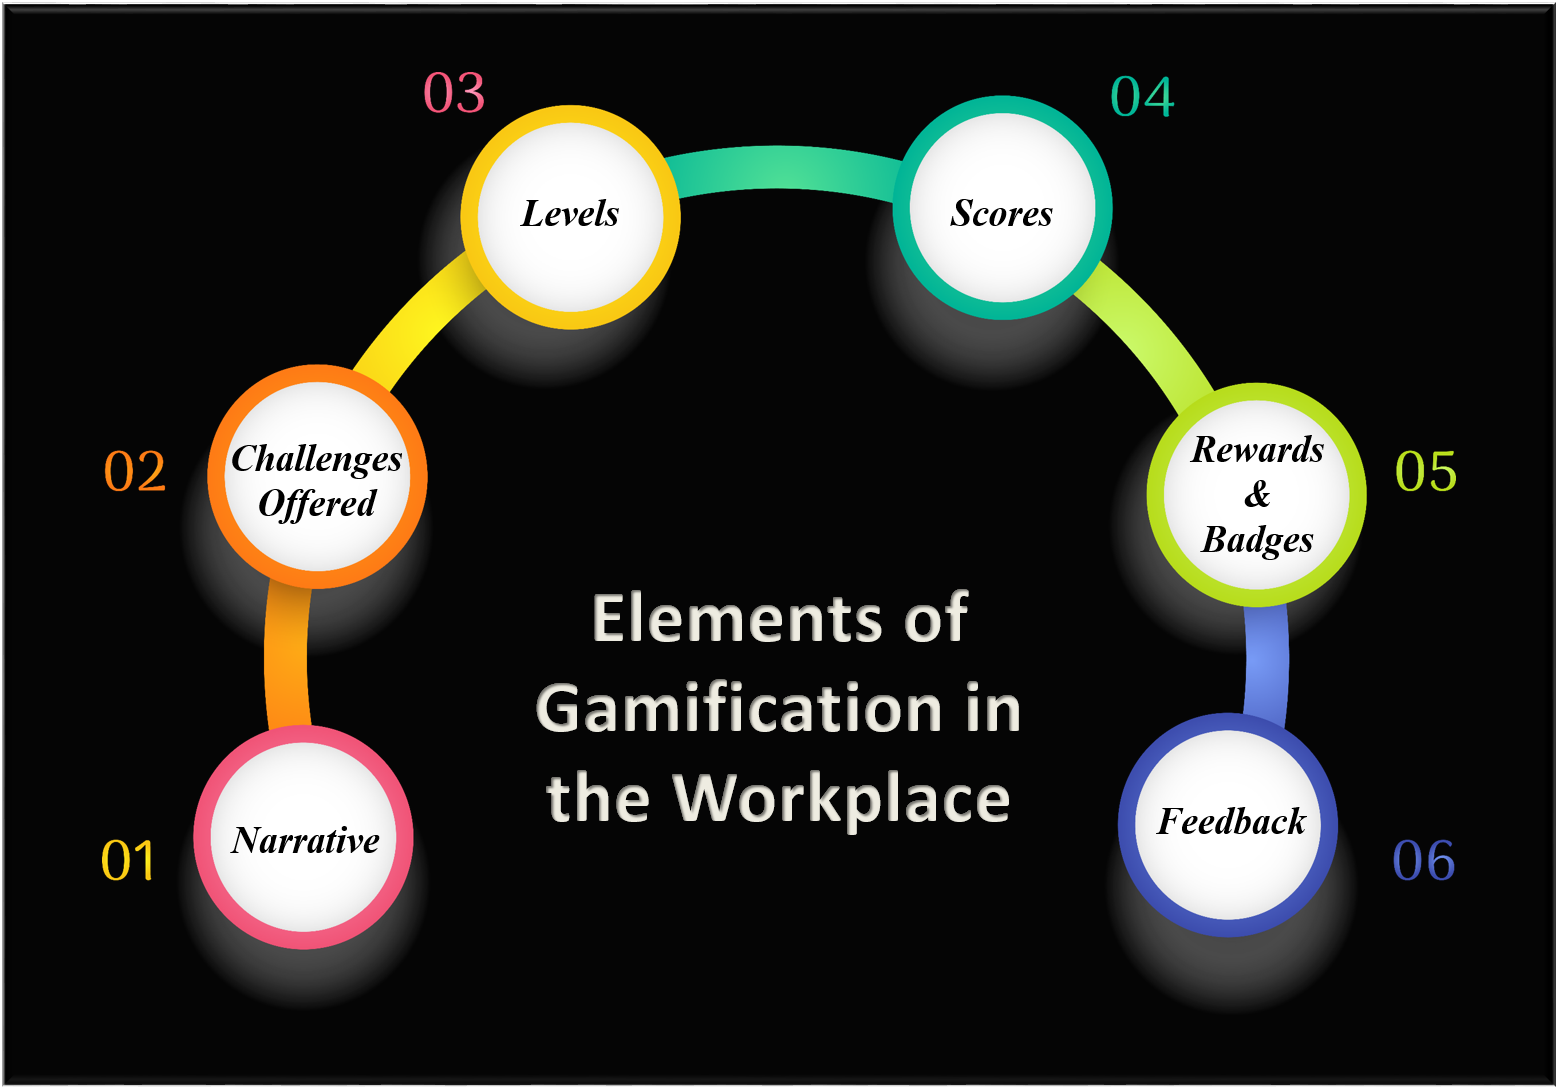 Elements of Gamification in the Workplace